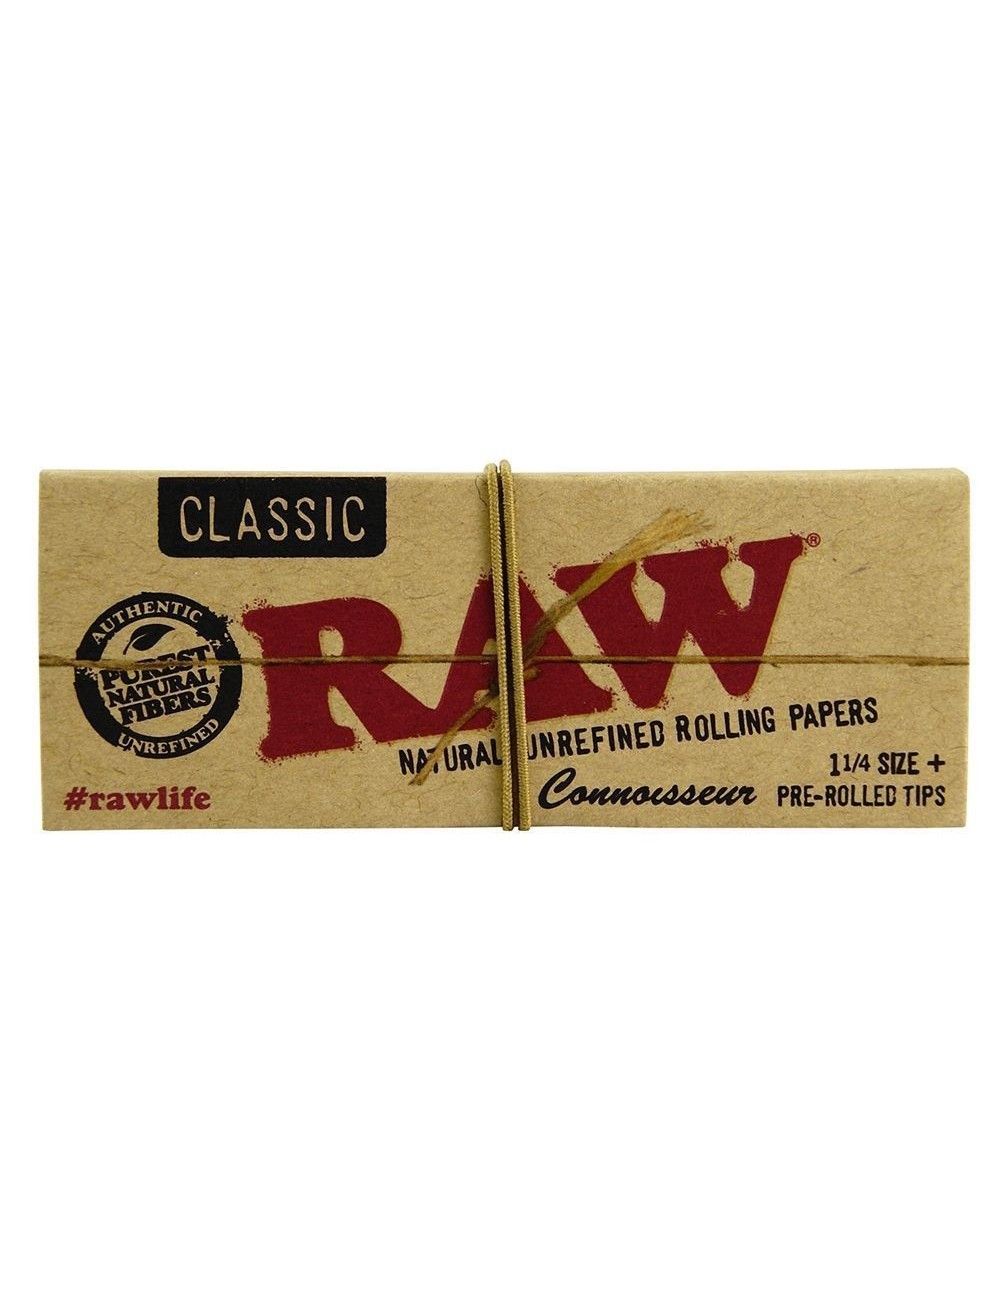 RAW Connoisseur 1¼ Size PREROLLED TIPS